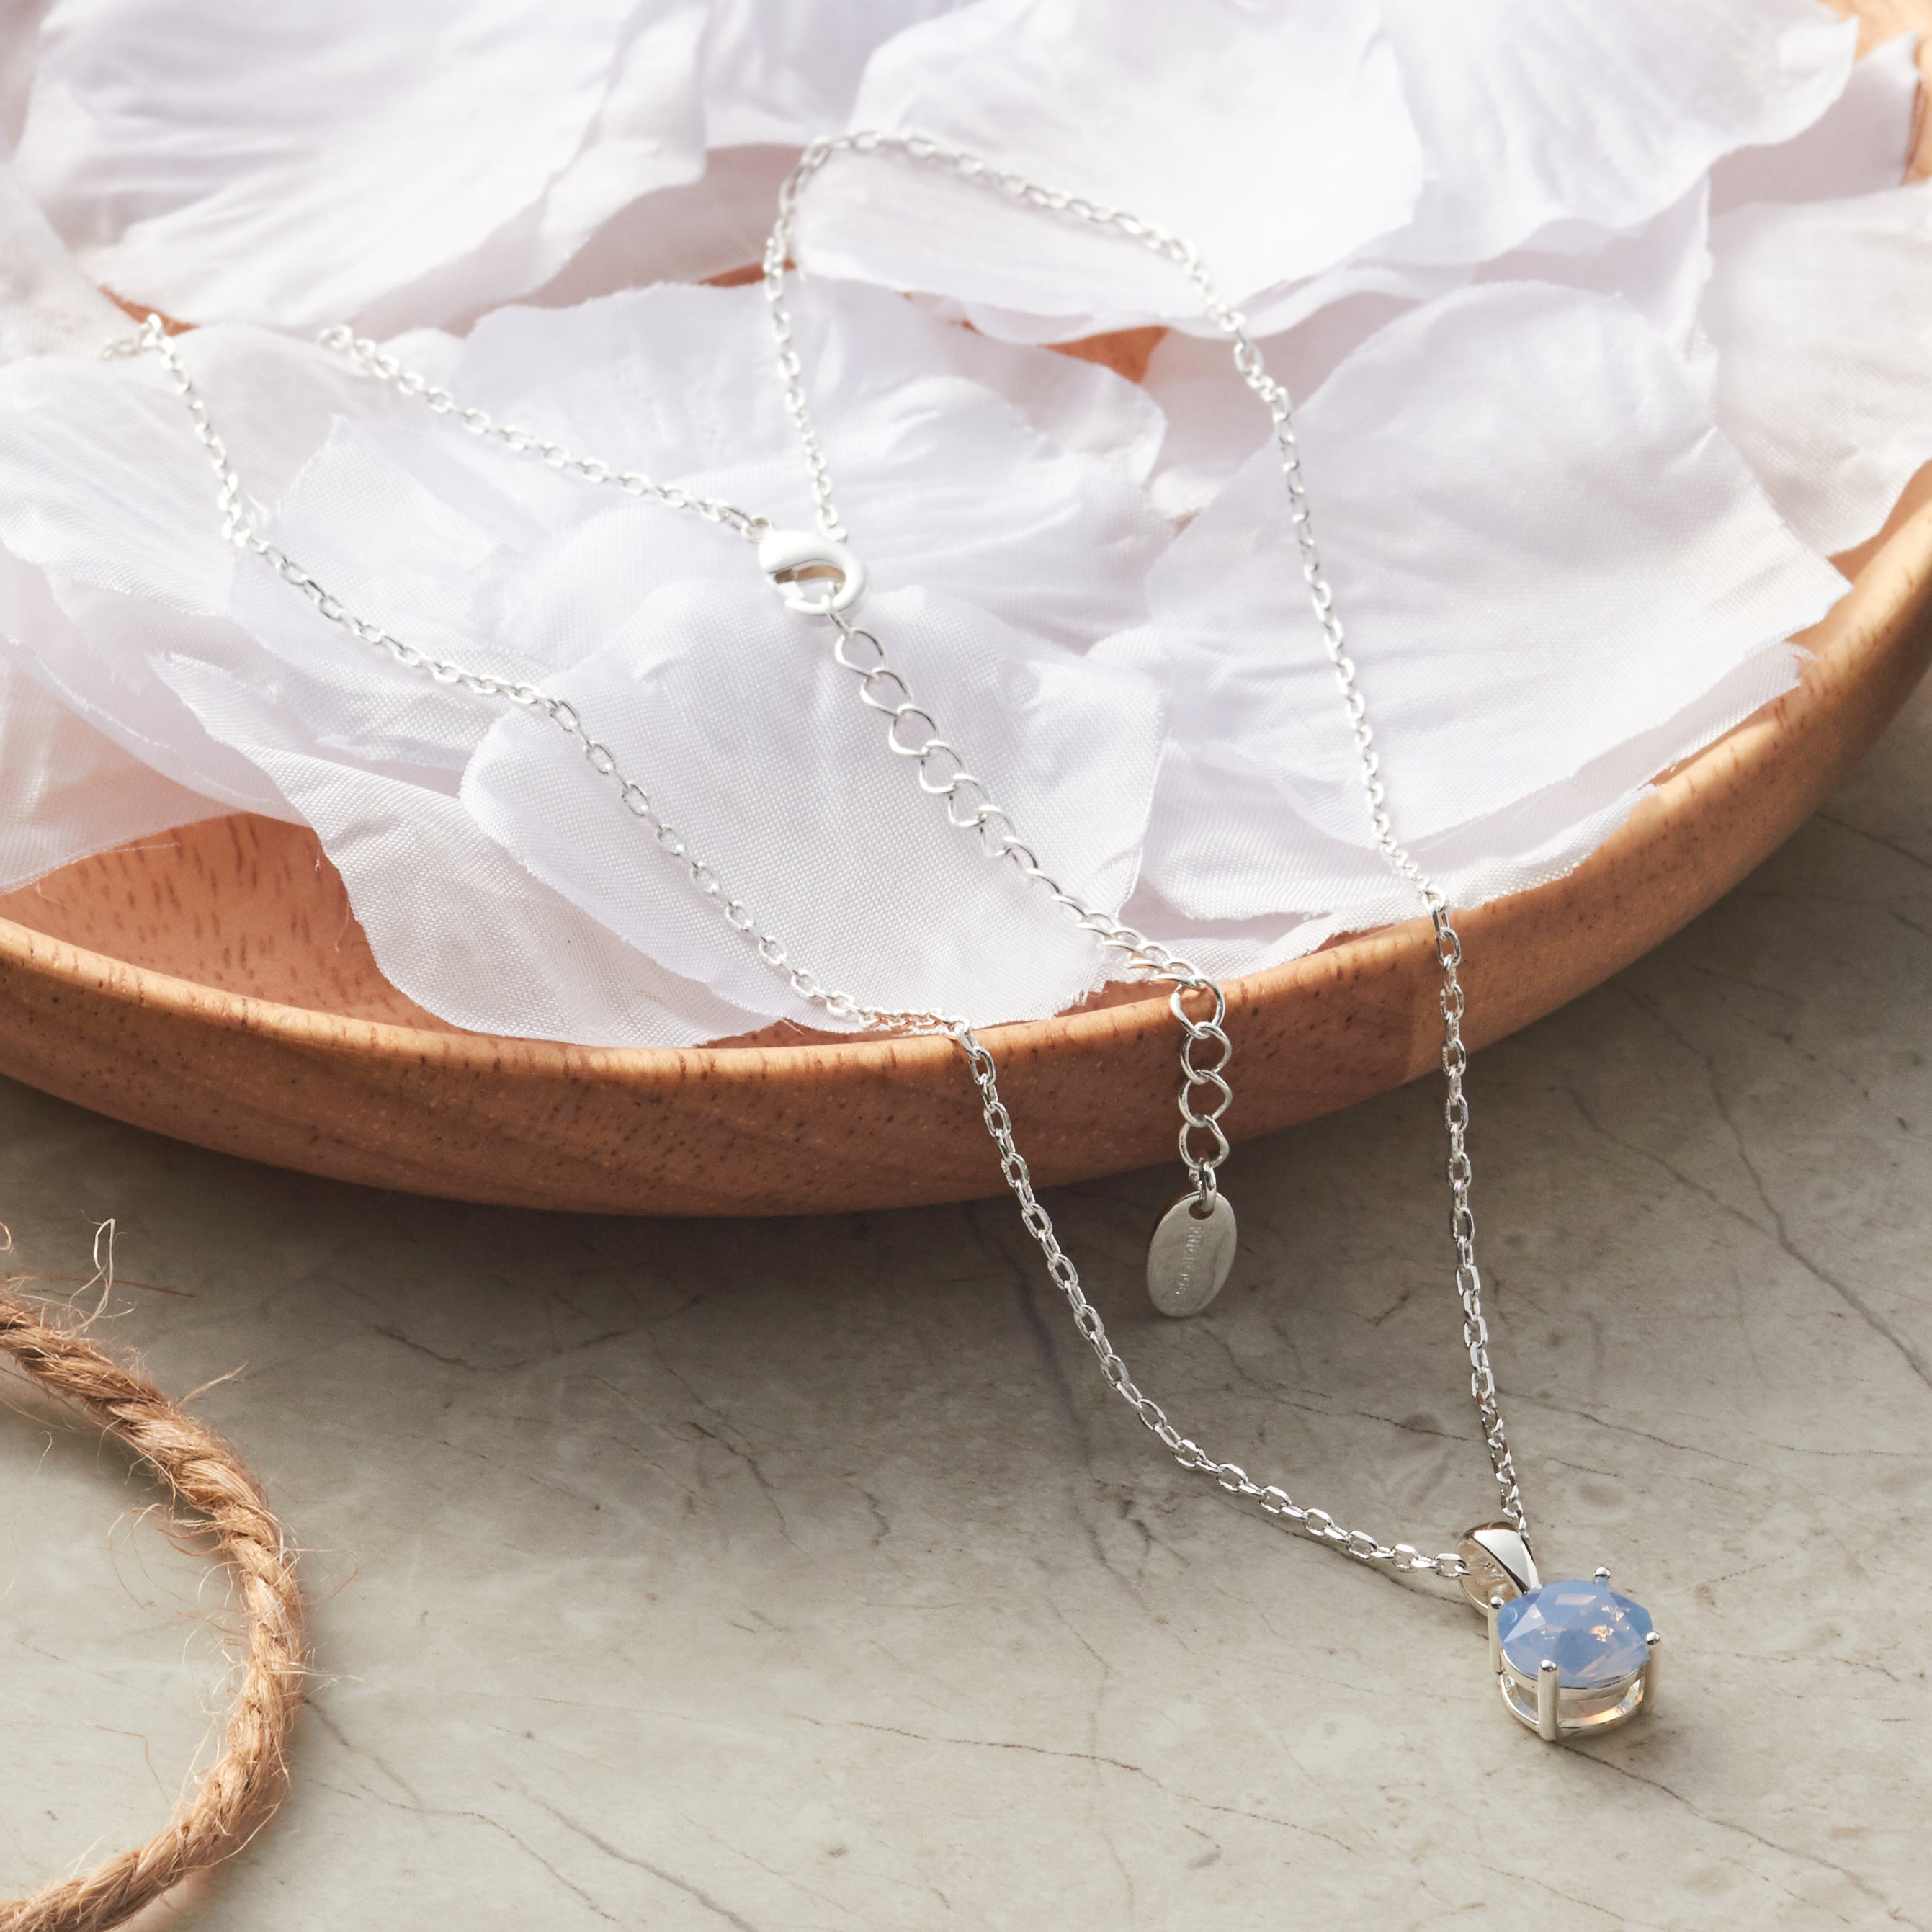 Air Blue Opal Necklace Created with Zircondia® Crystals